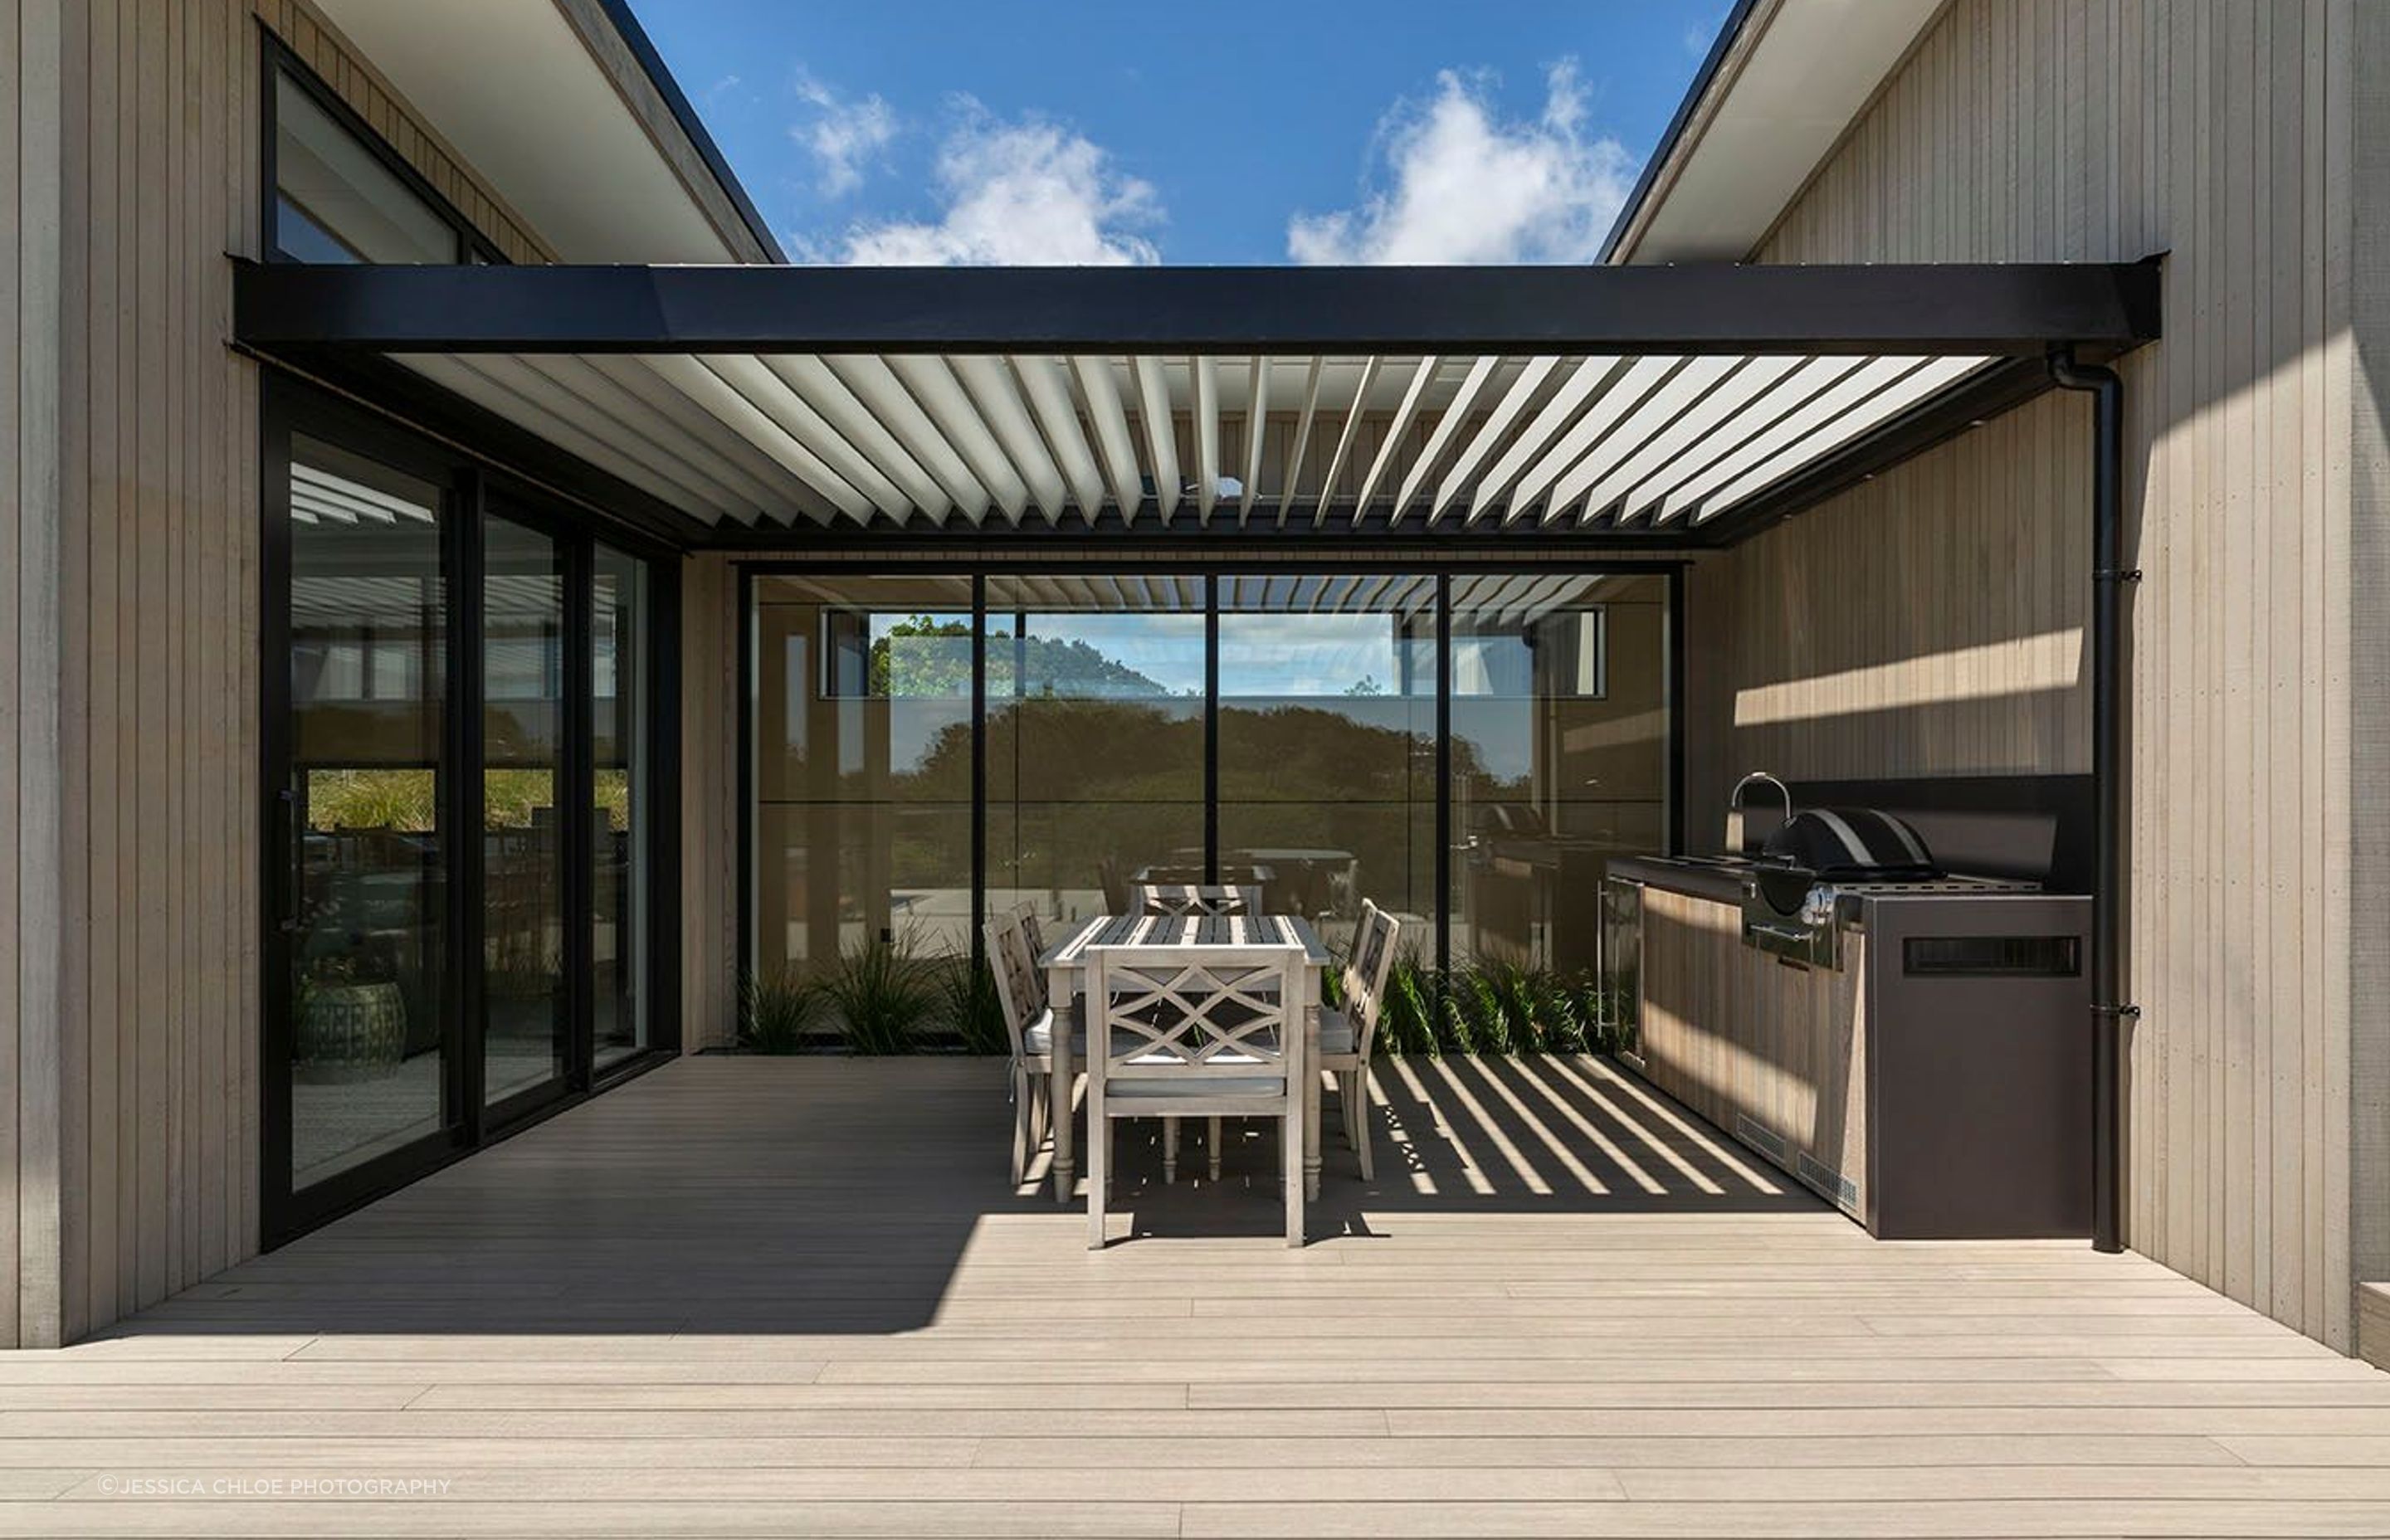 This fabulous outdoor kitchen and barbecue area is the prefect sheltered spot for summer entertaining.